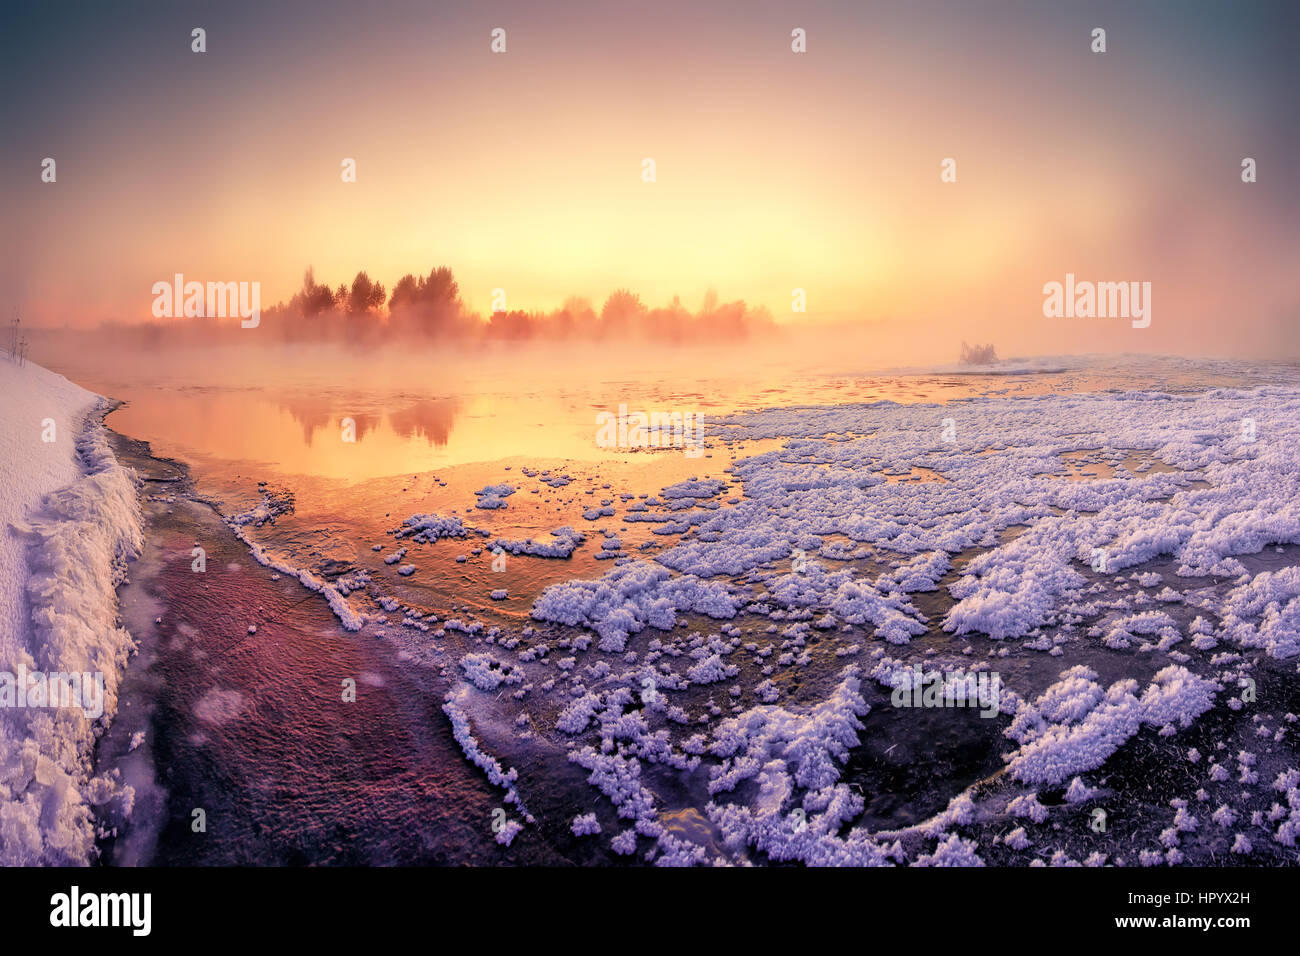 Colorful winter morning on lake covered by snow Stock Photo